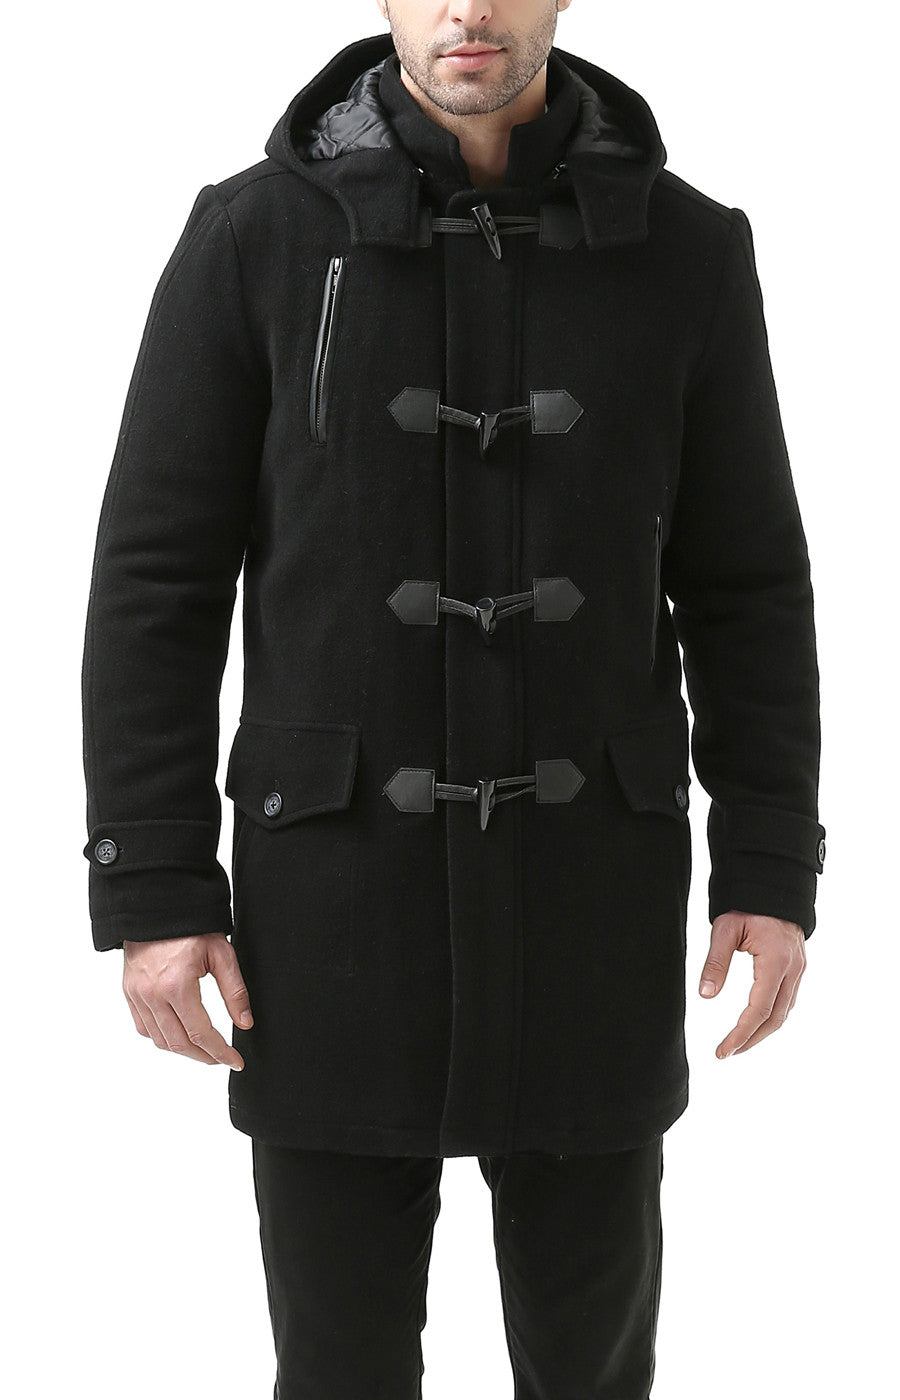 BGSD Men Tyson Wool Blend Leather Trimmed Toggle Coat